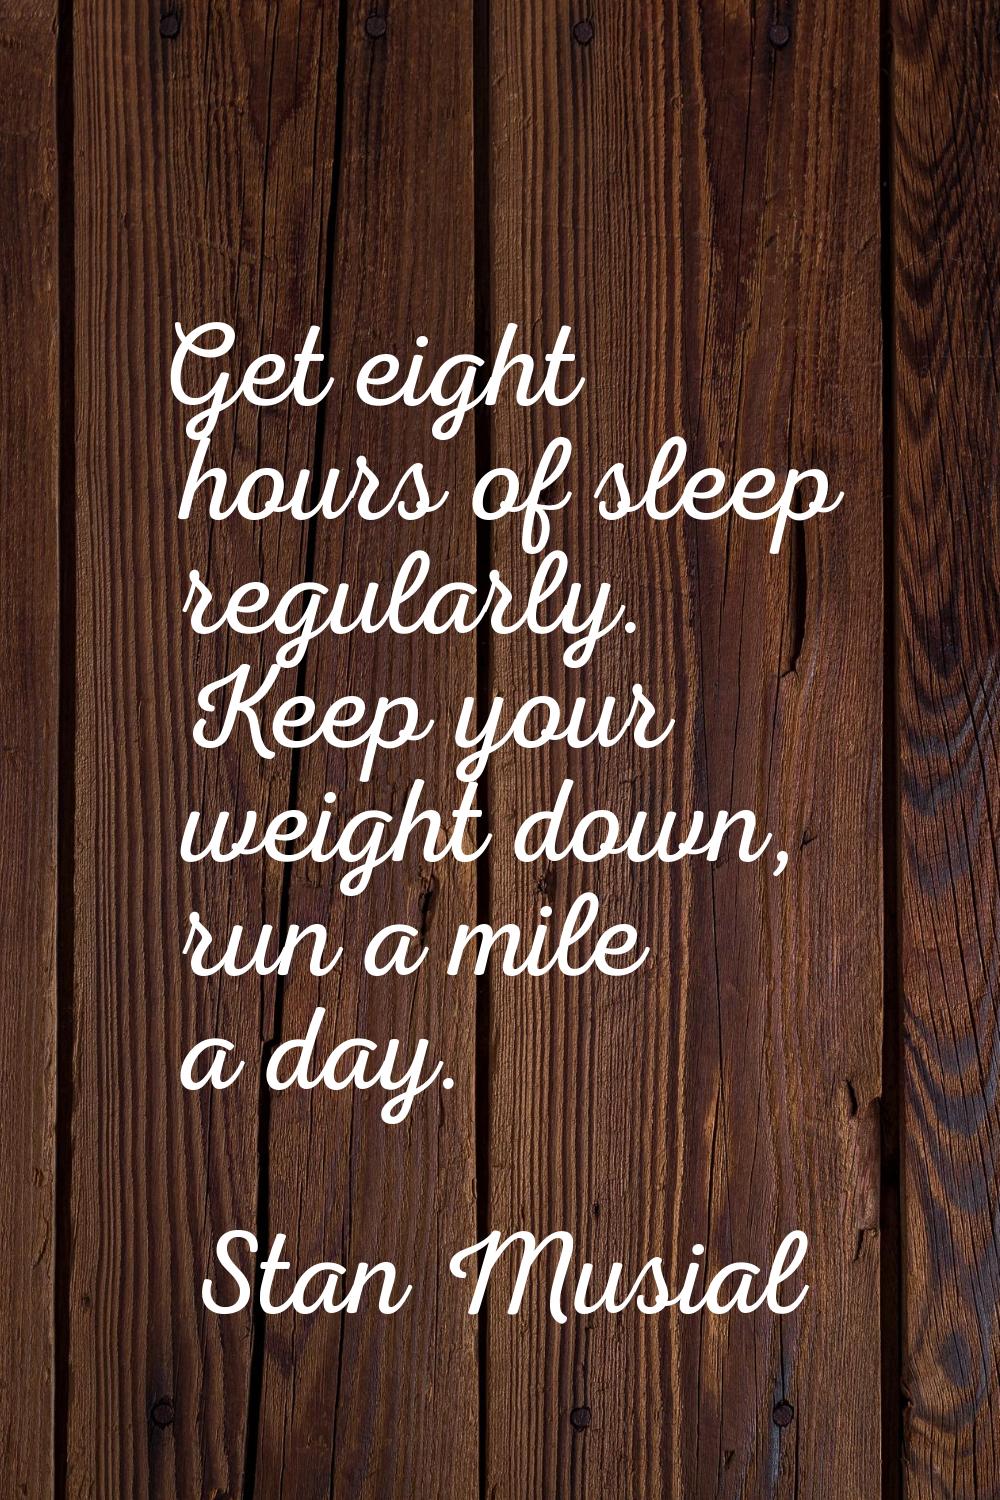 Get eight hours of sleep regularly. Keep your weight down, run a mile a day.